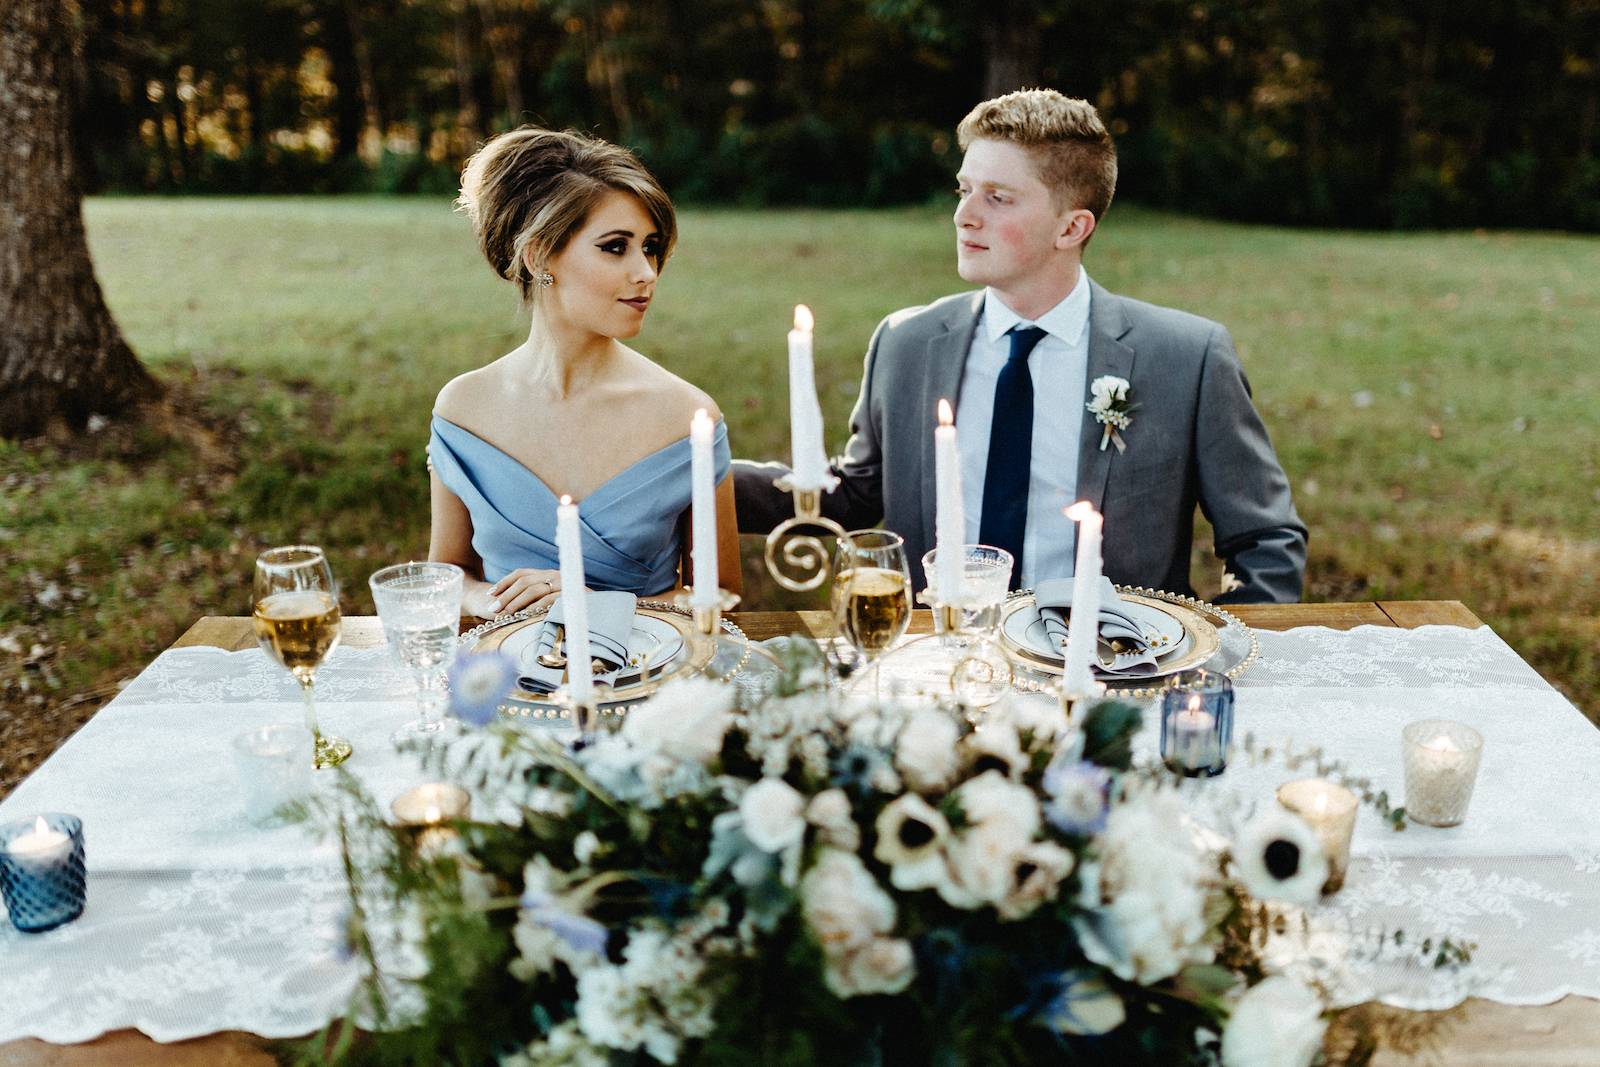 A 1960s Vintage Mod, Abalone Wedding Styled Shoot by Abby Weeden |  Nashville